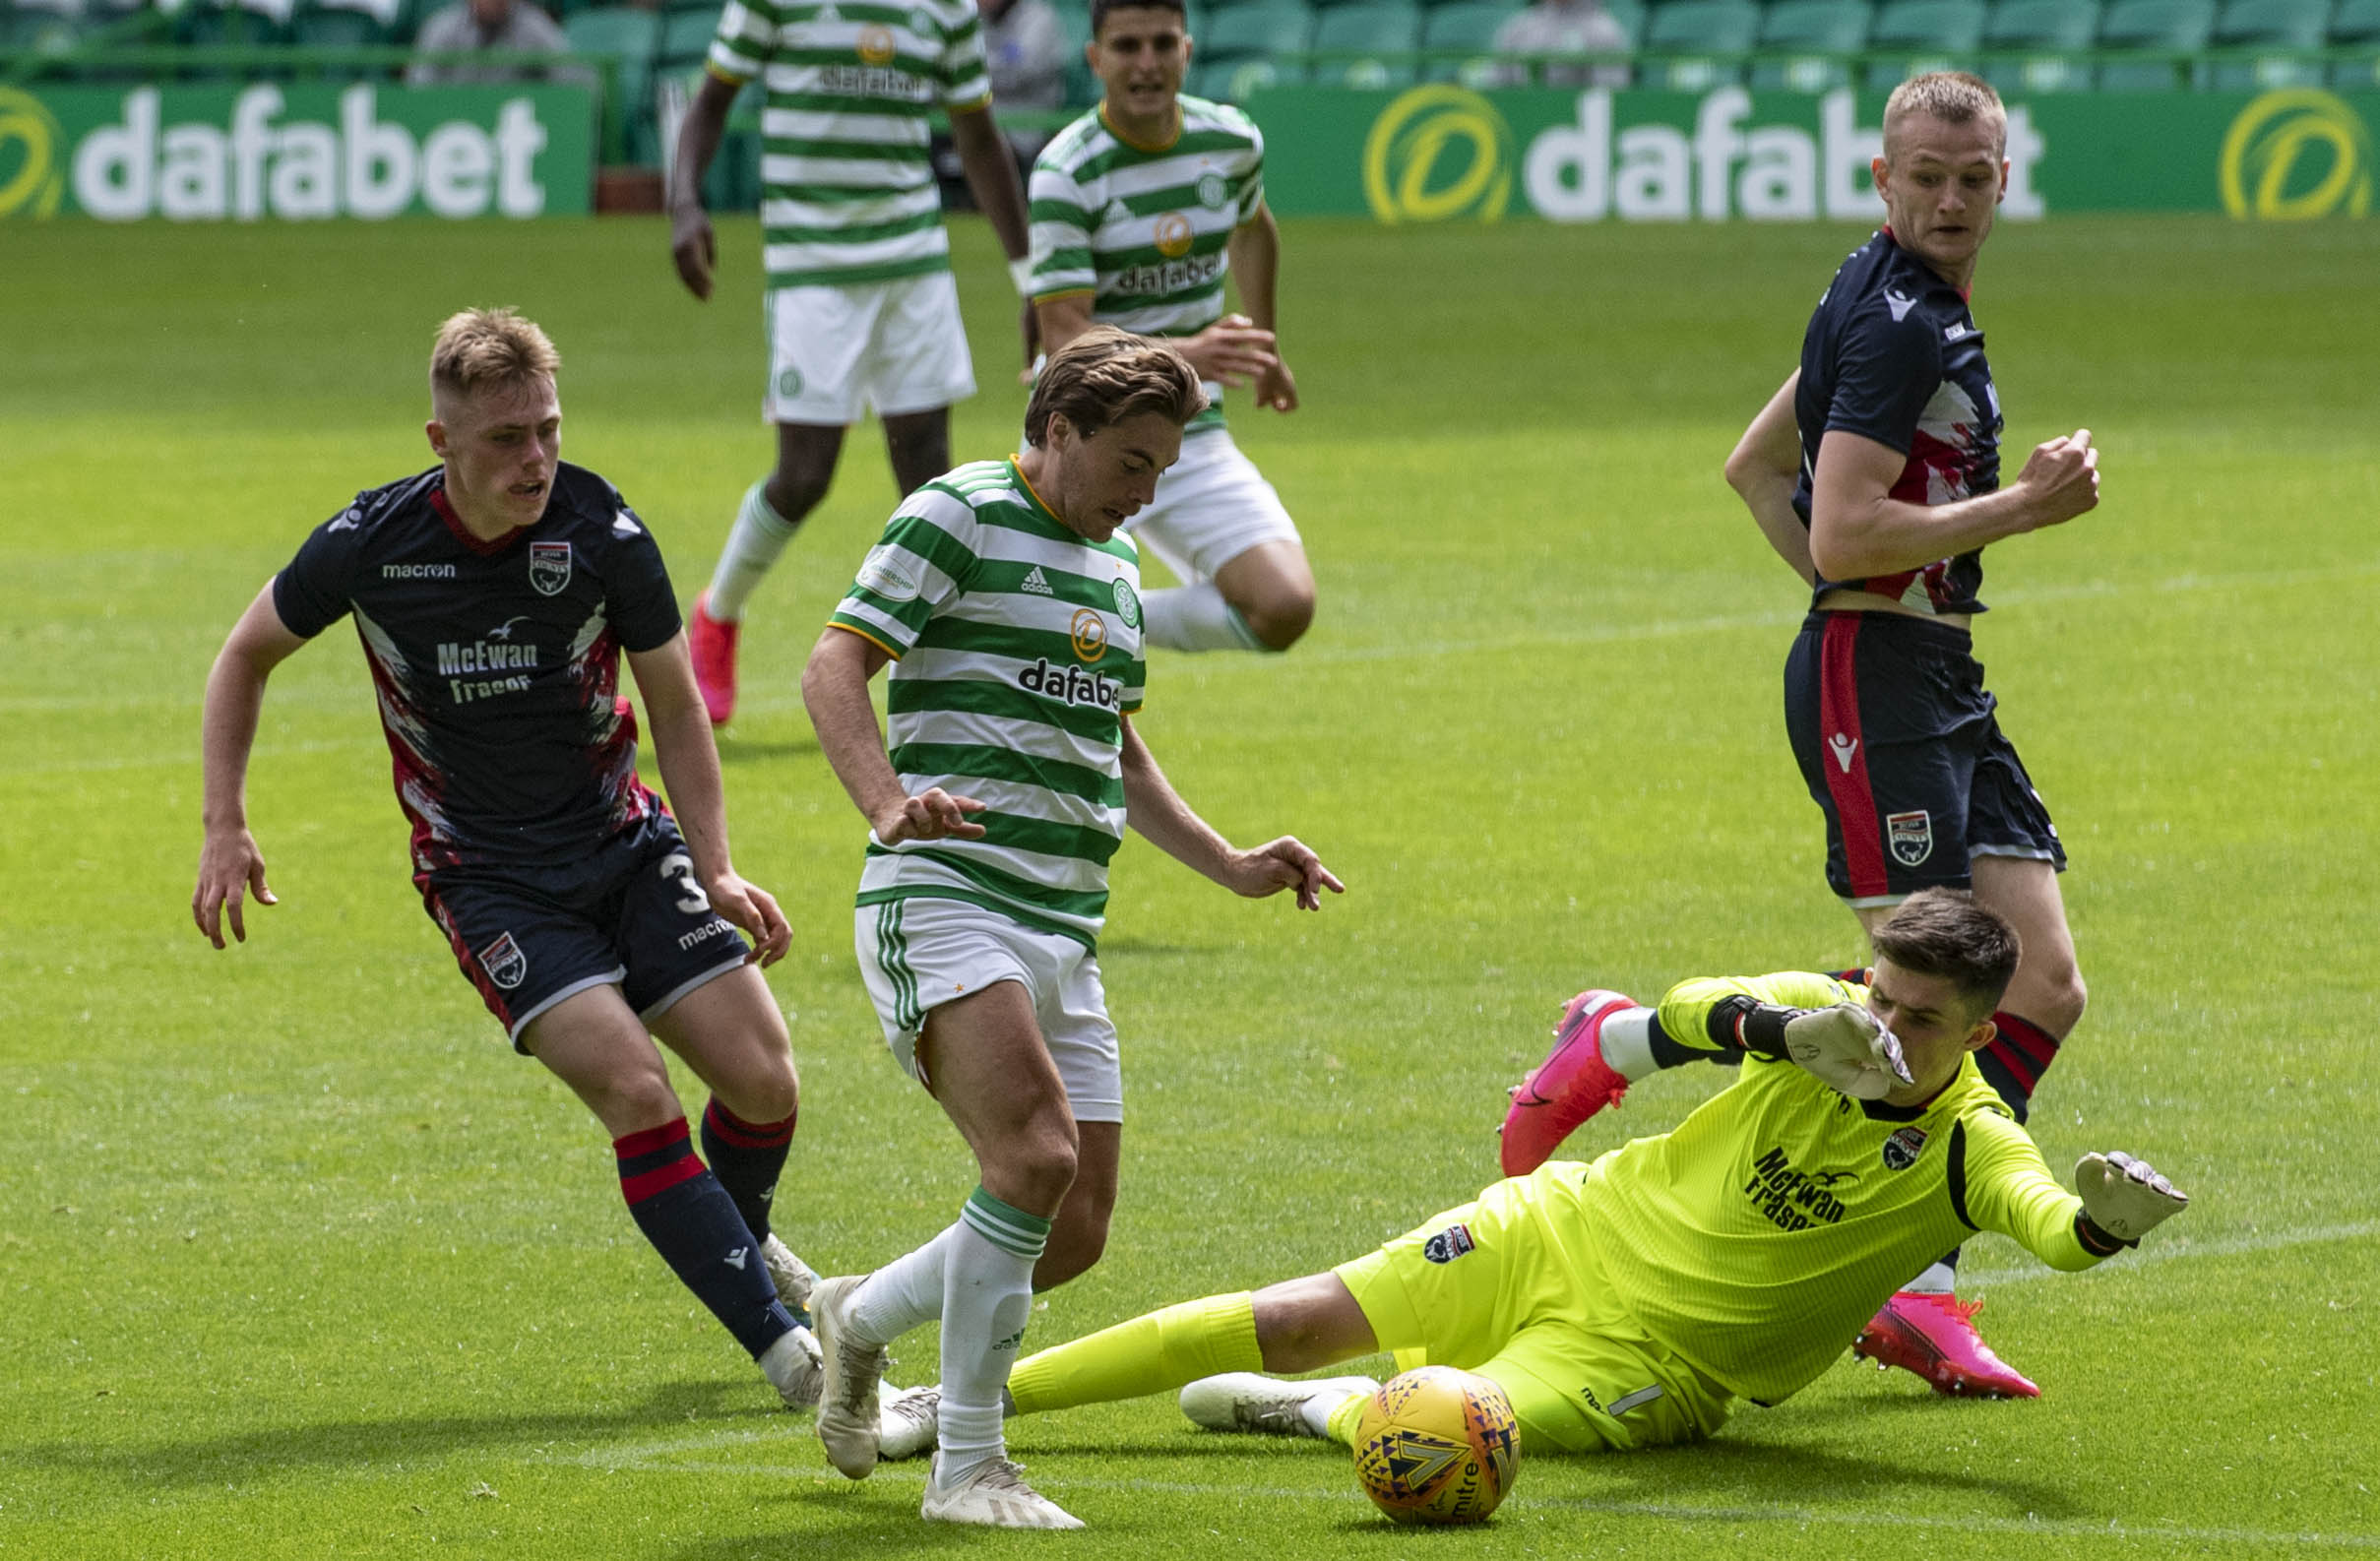 Celtic's James Forrest tries to go round trialist goalkeeper Ross Doohan during a pre-season friendly match between Celtic and Ross County at Celtic Park.